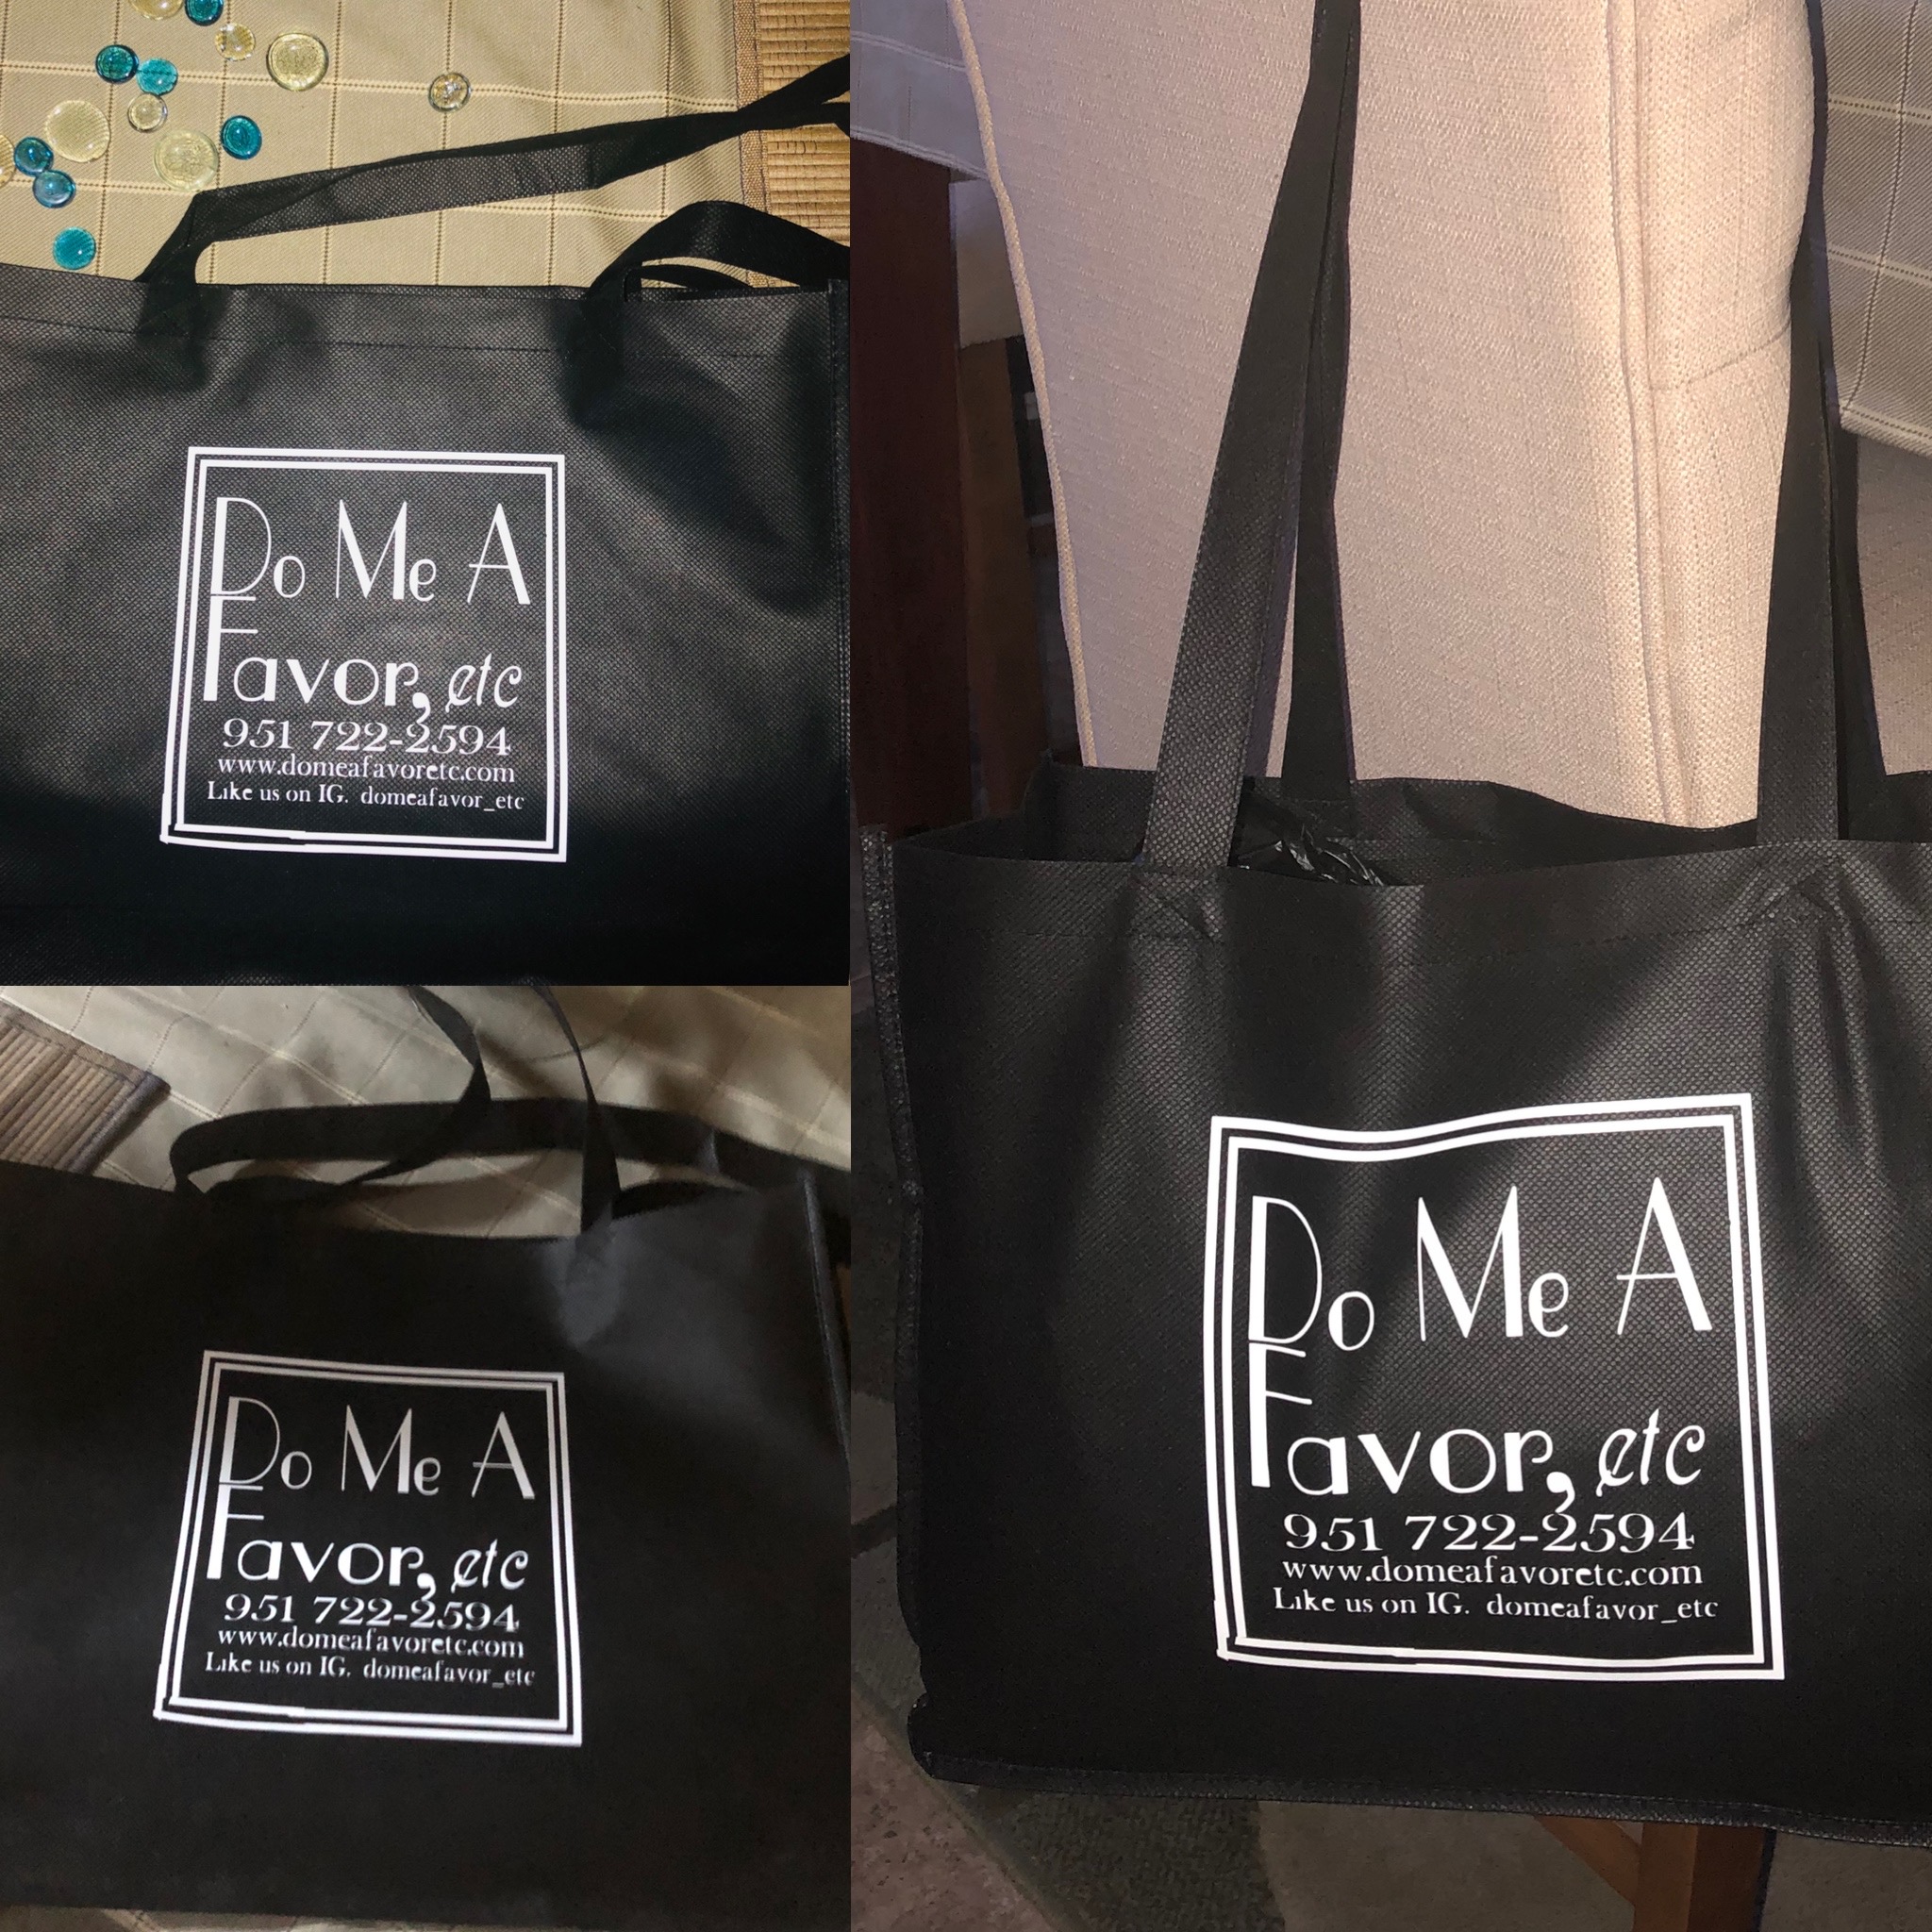 I put my logo and contact information on the outside of a reusable shopping bag that I give to 